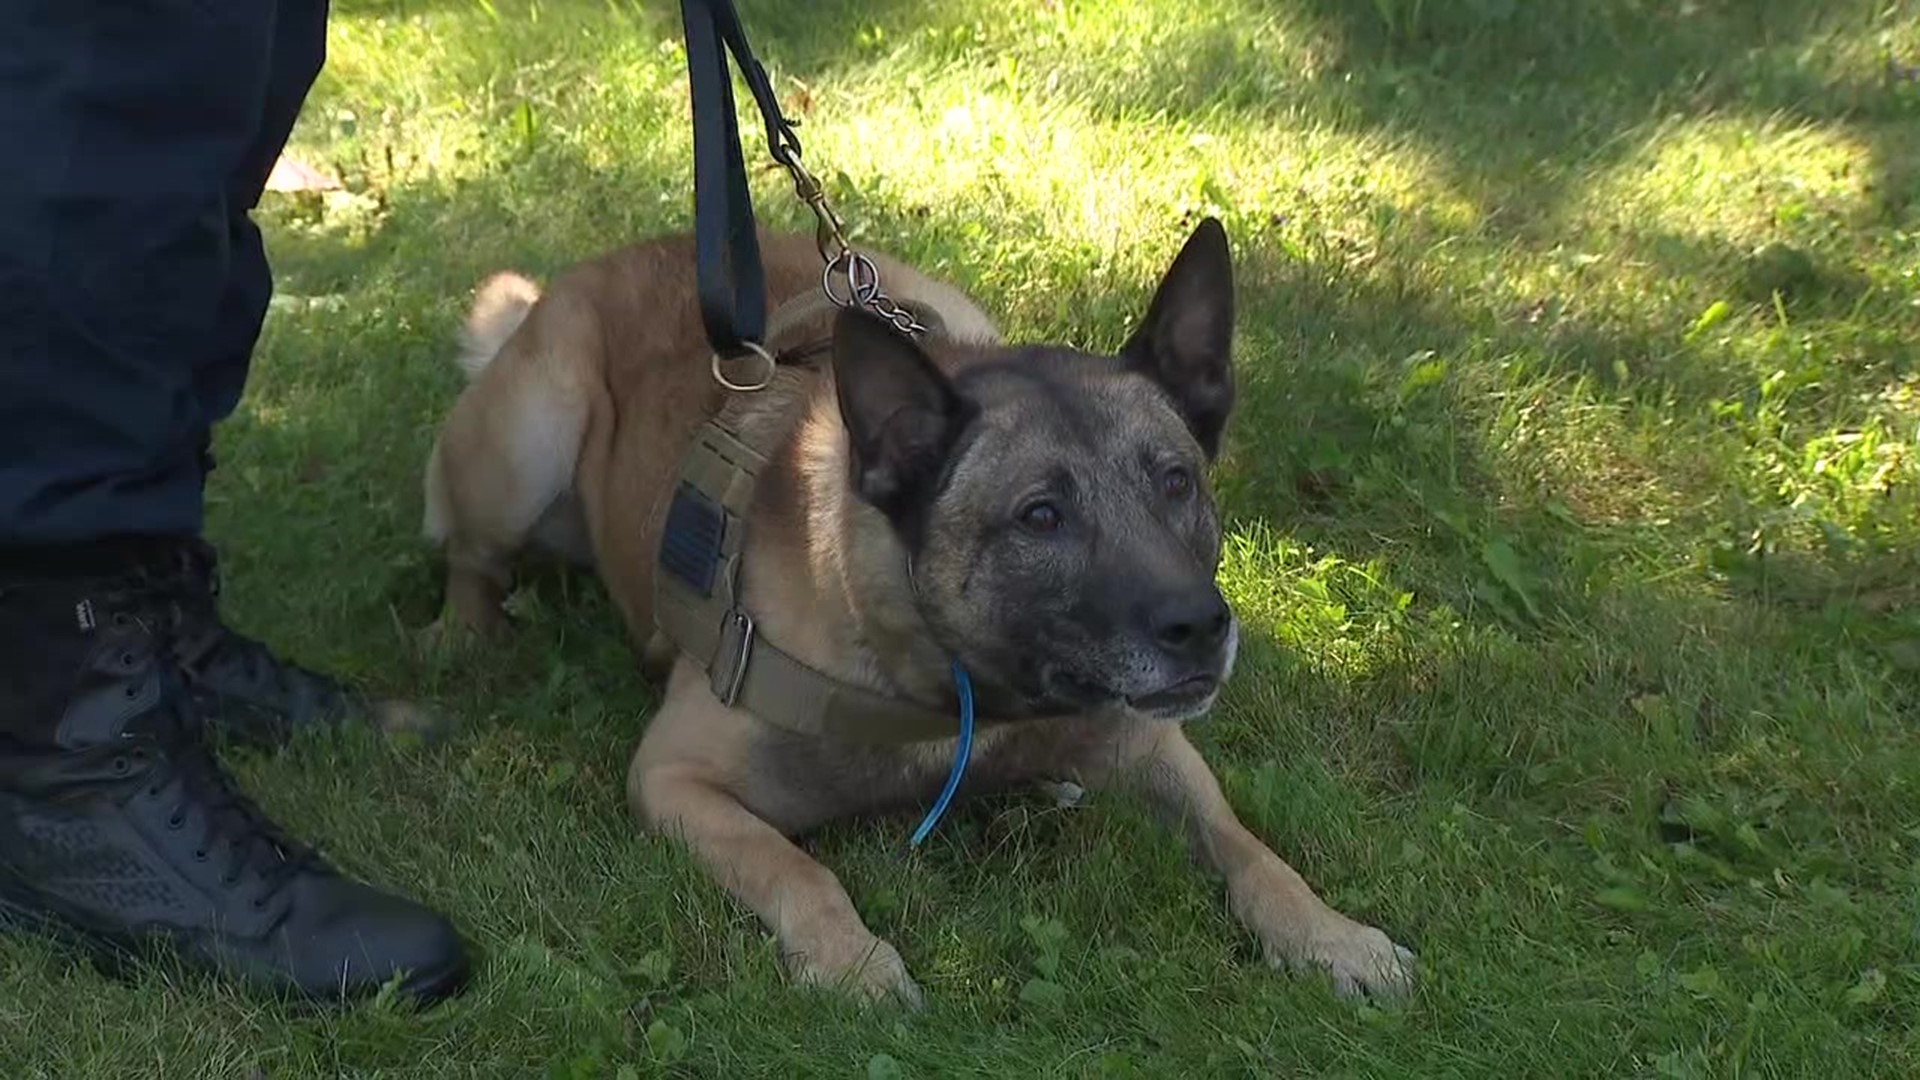 Newswatch 16's Amanda Eustice spoke with a K-9 officer in the Poconos who knows what law enforcement and K-9s went through to capture a fugitive on Wednesday.